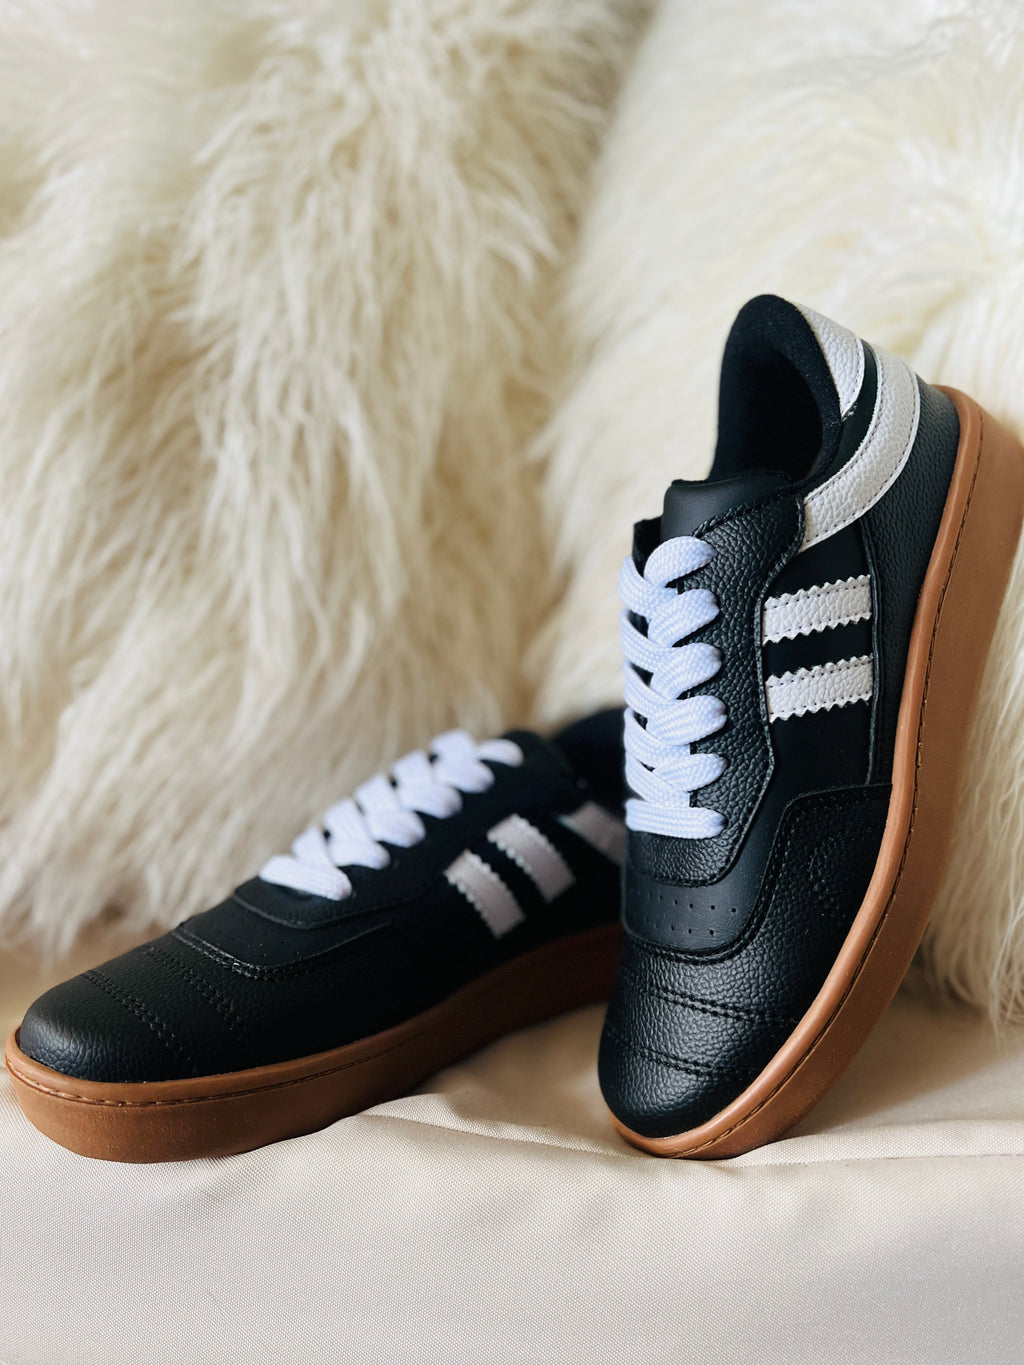 Maker's Shoes I Gussieduponline sneakers. tennis shoes. super comfortable. white. black. striped. athletic shoe. Women's Boutique. Women Owned Boutique. Small Business.